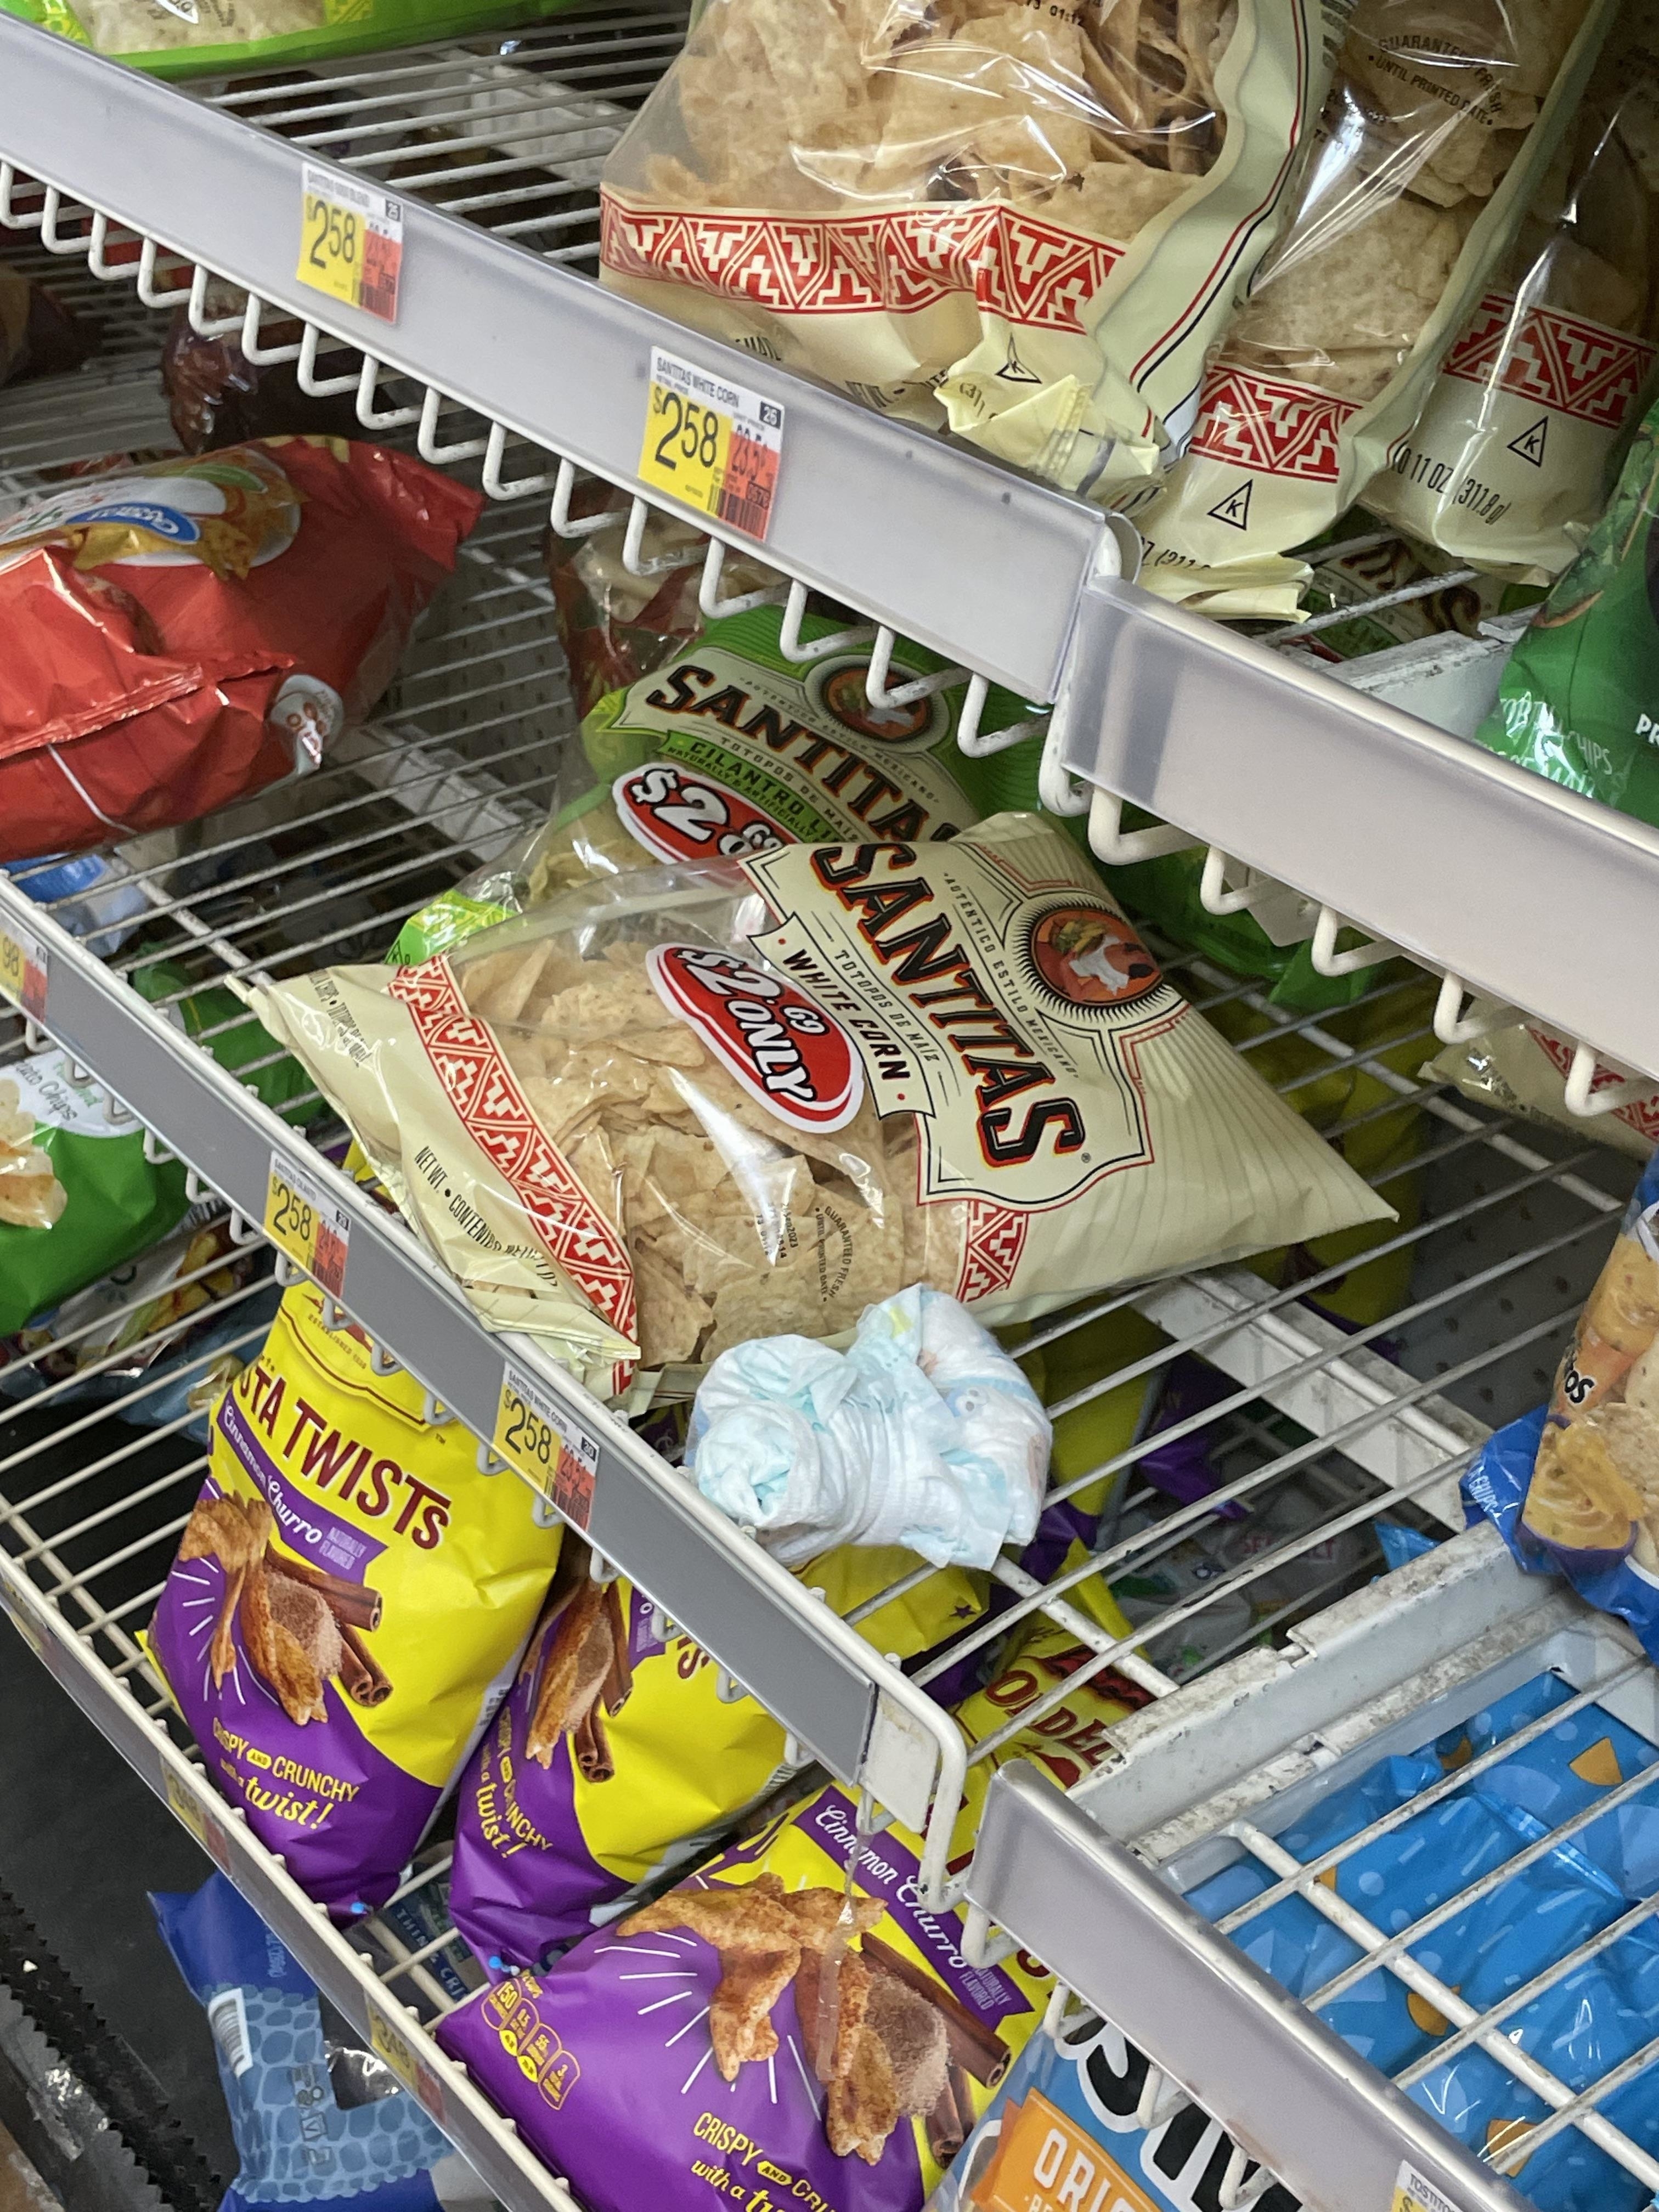 Shelves stocked with various brands of tortilla chips in a store and a dirty diaper on one shelf